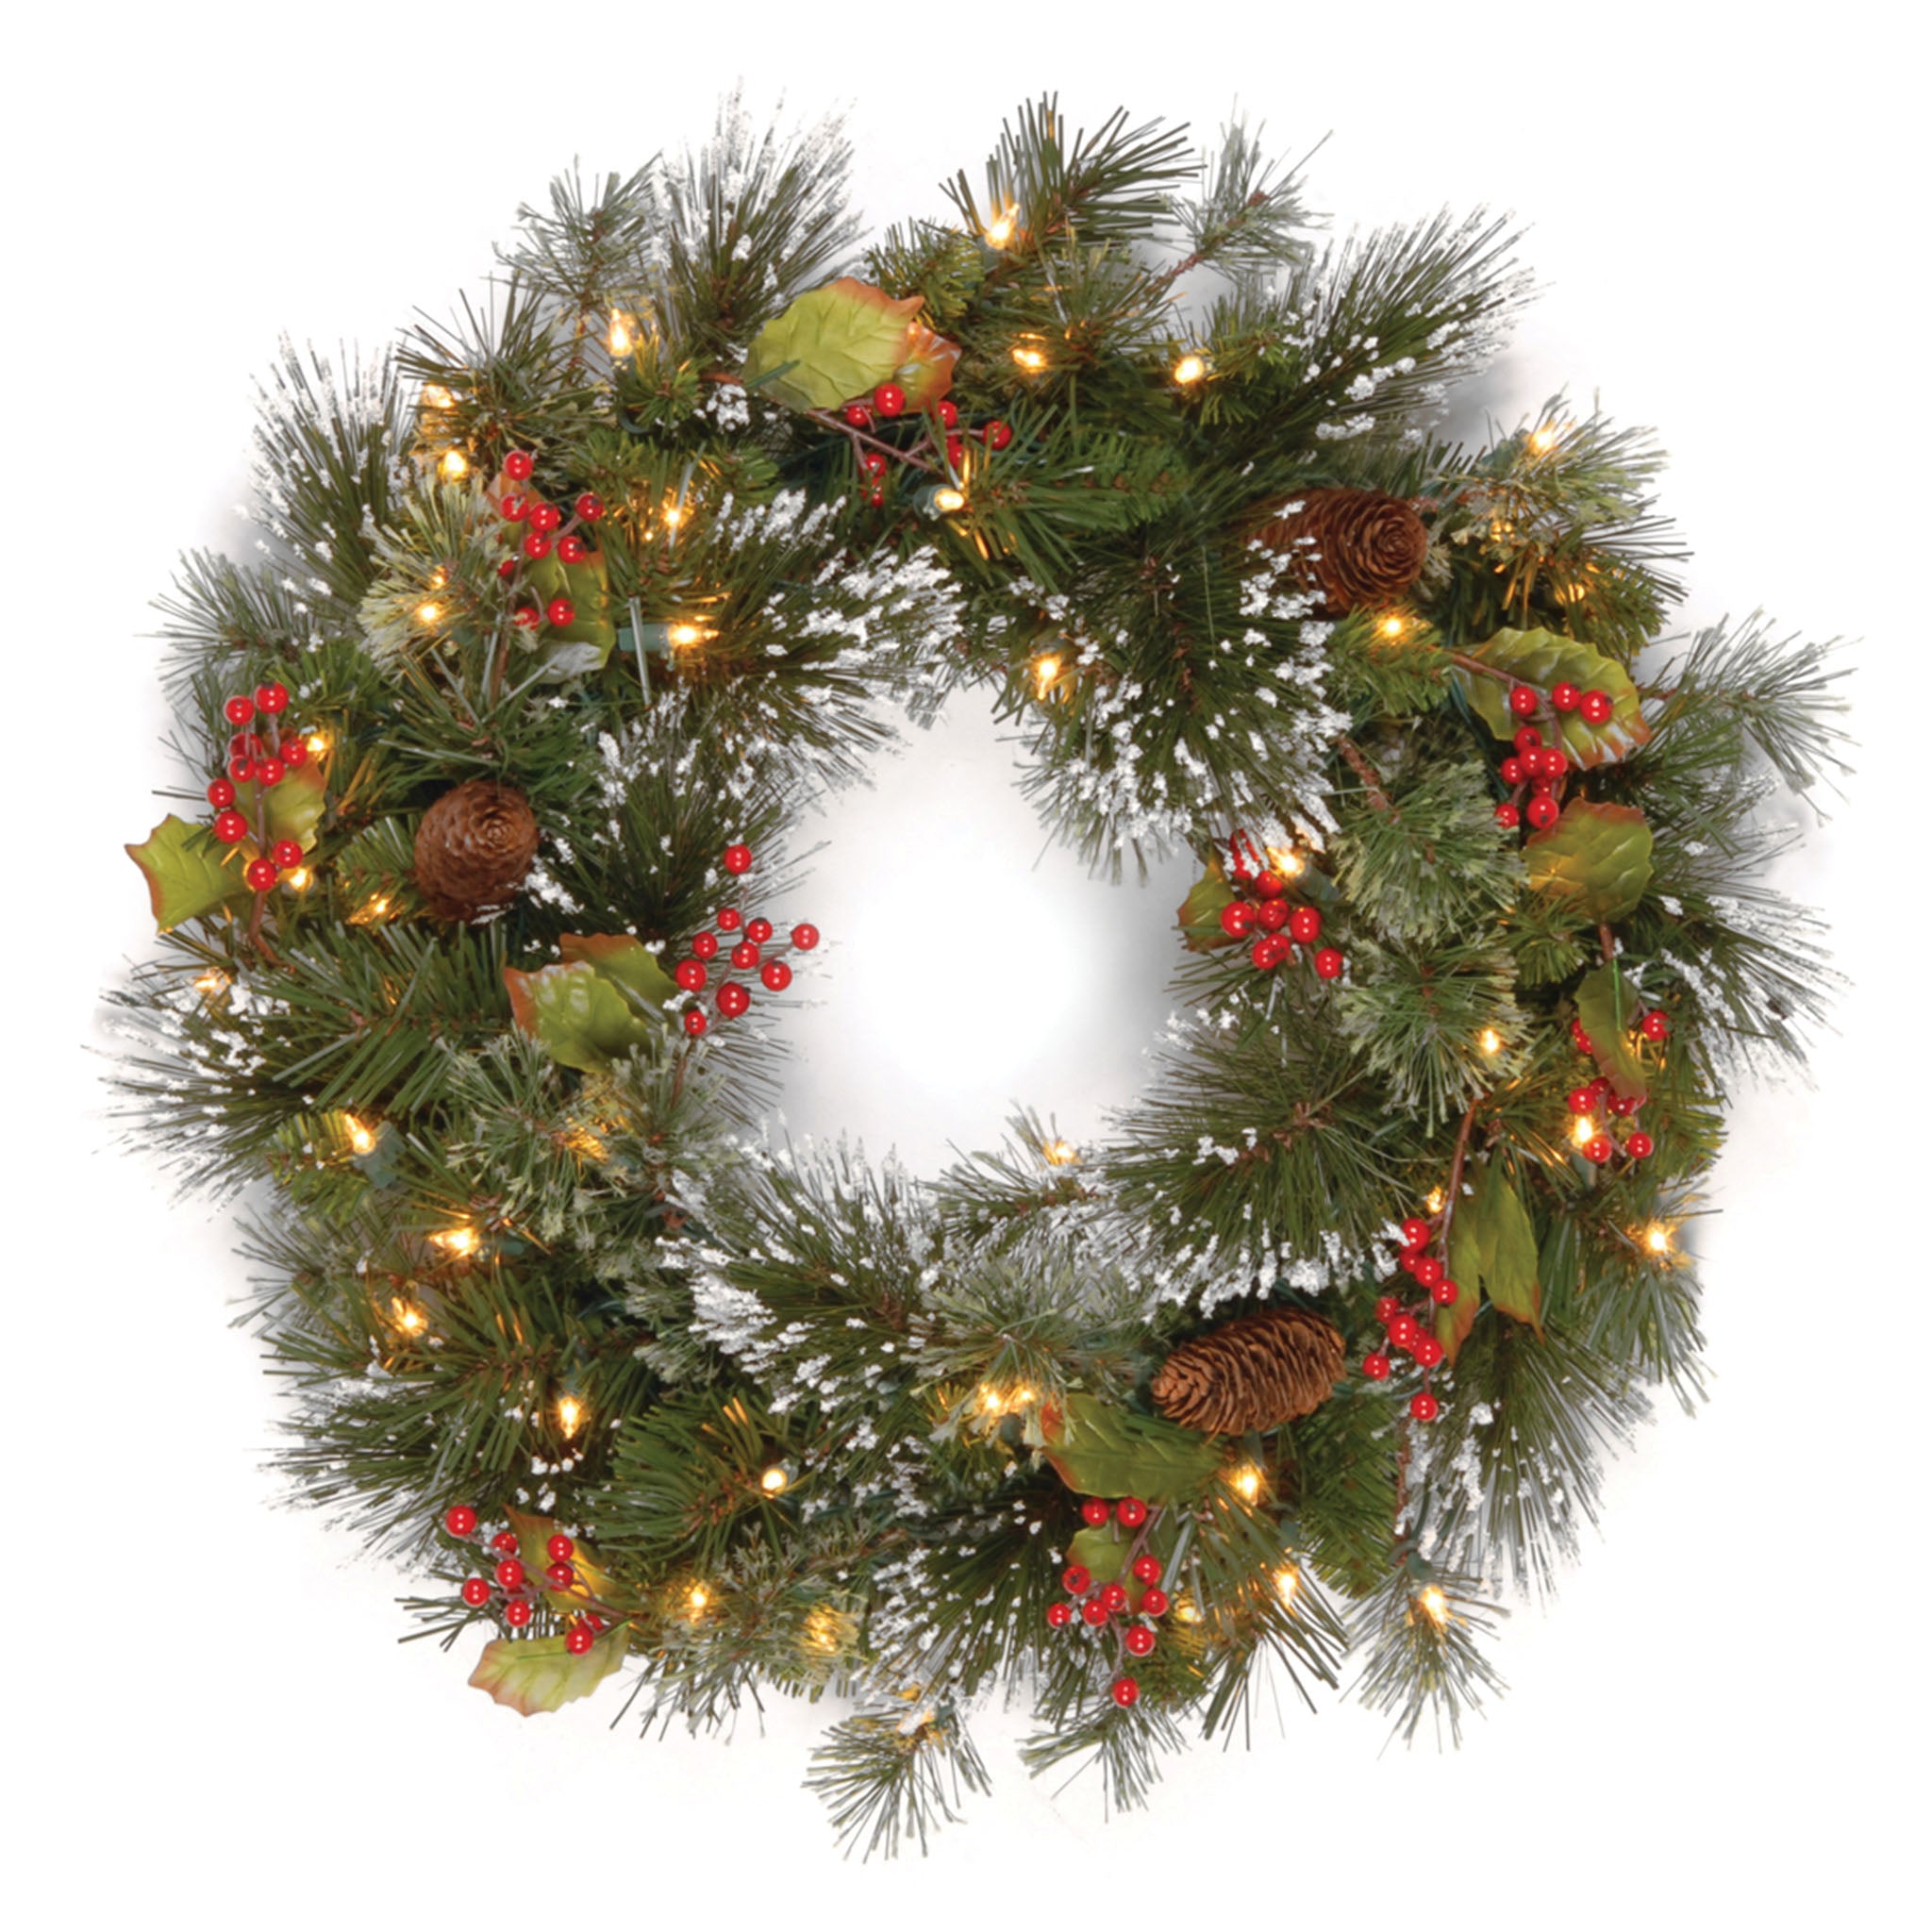 24" Wintry Pine(R) Wreath with Clear Lights